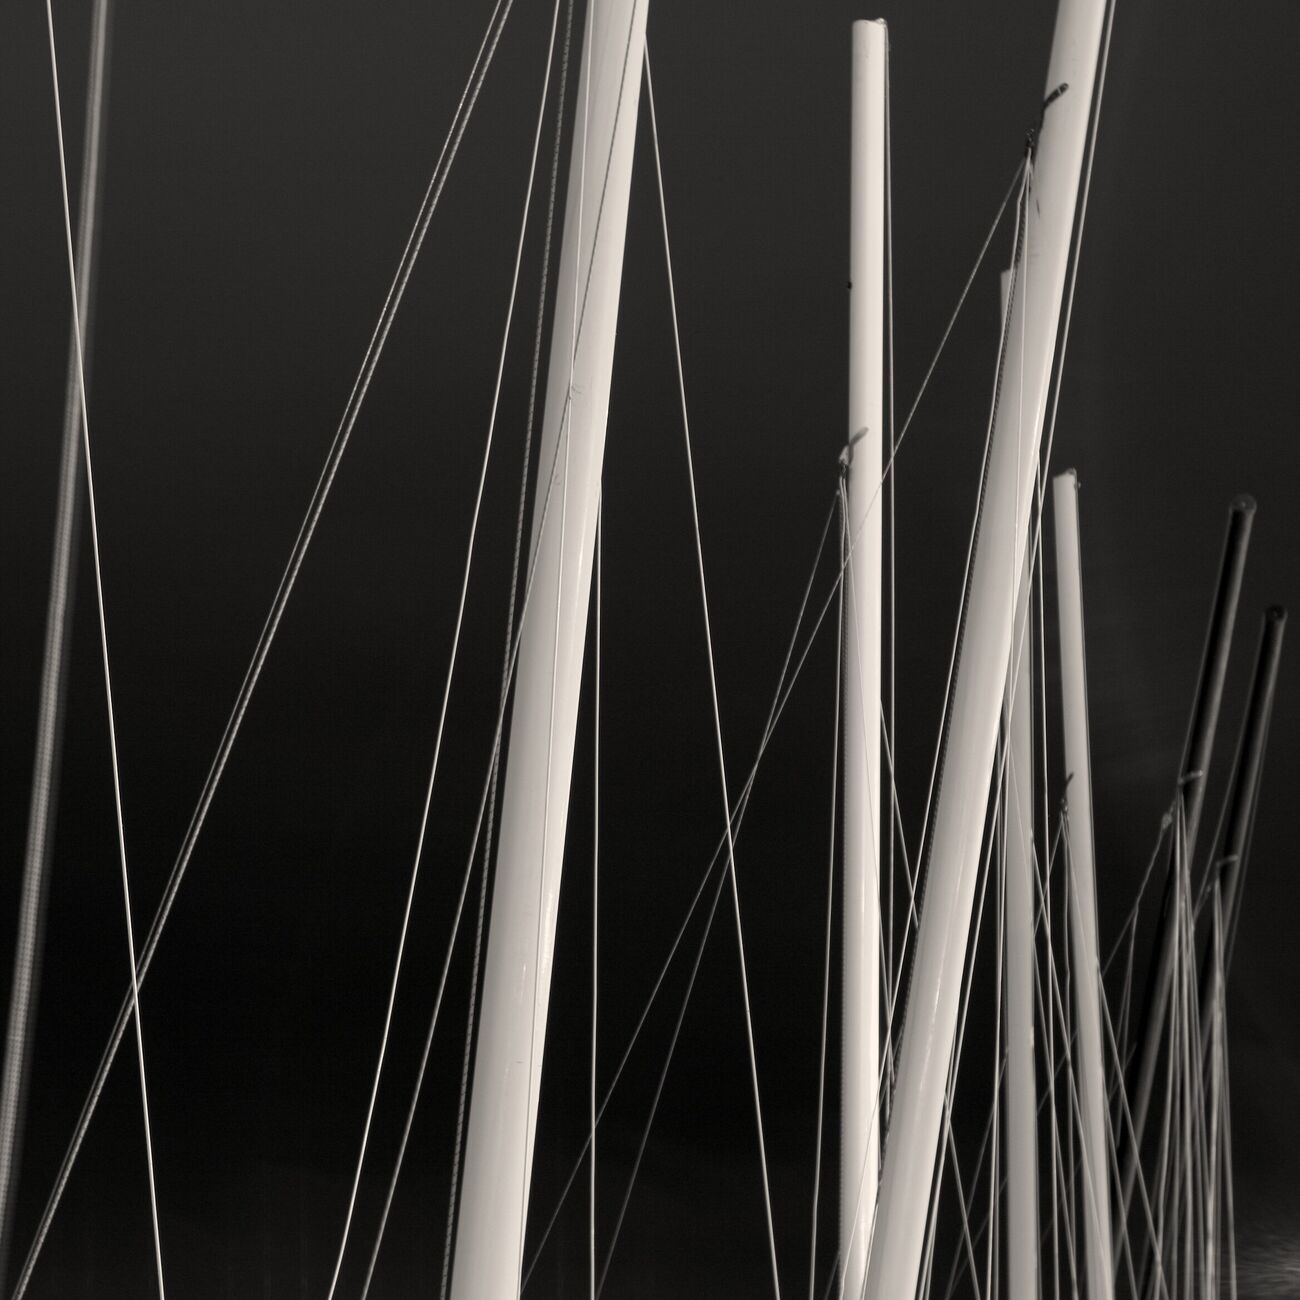 Order a 17.7 x 17.7 in, Waiting for the wind. Ref-666-4 - Denis Olivier Art Photography